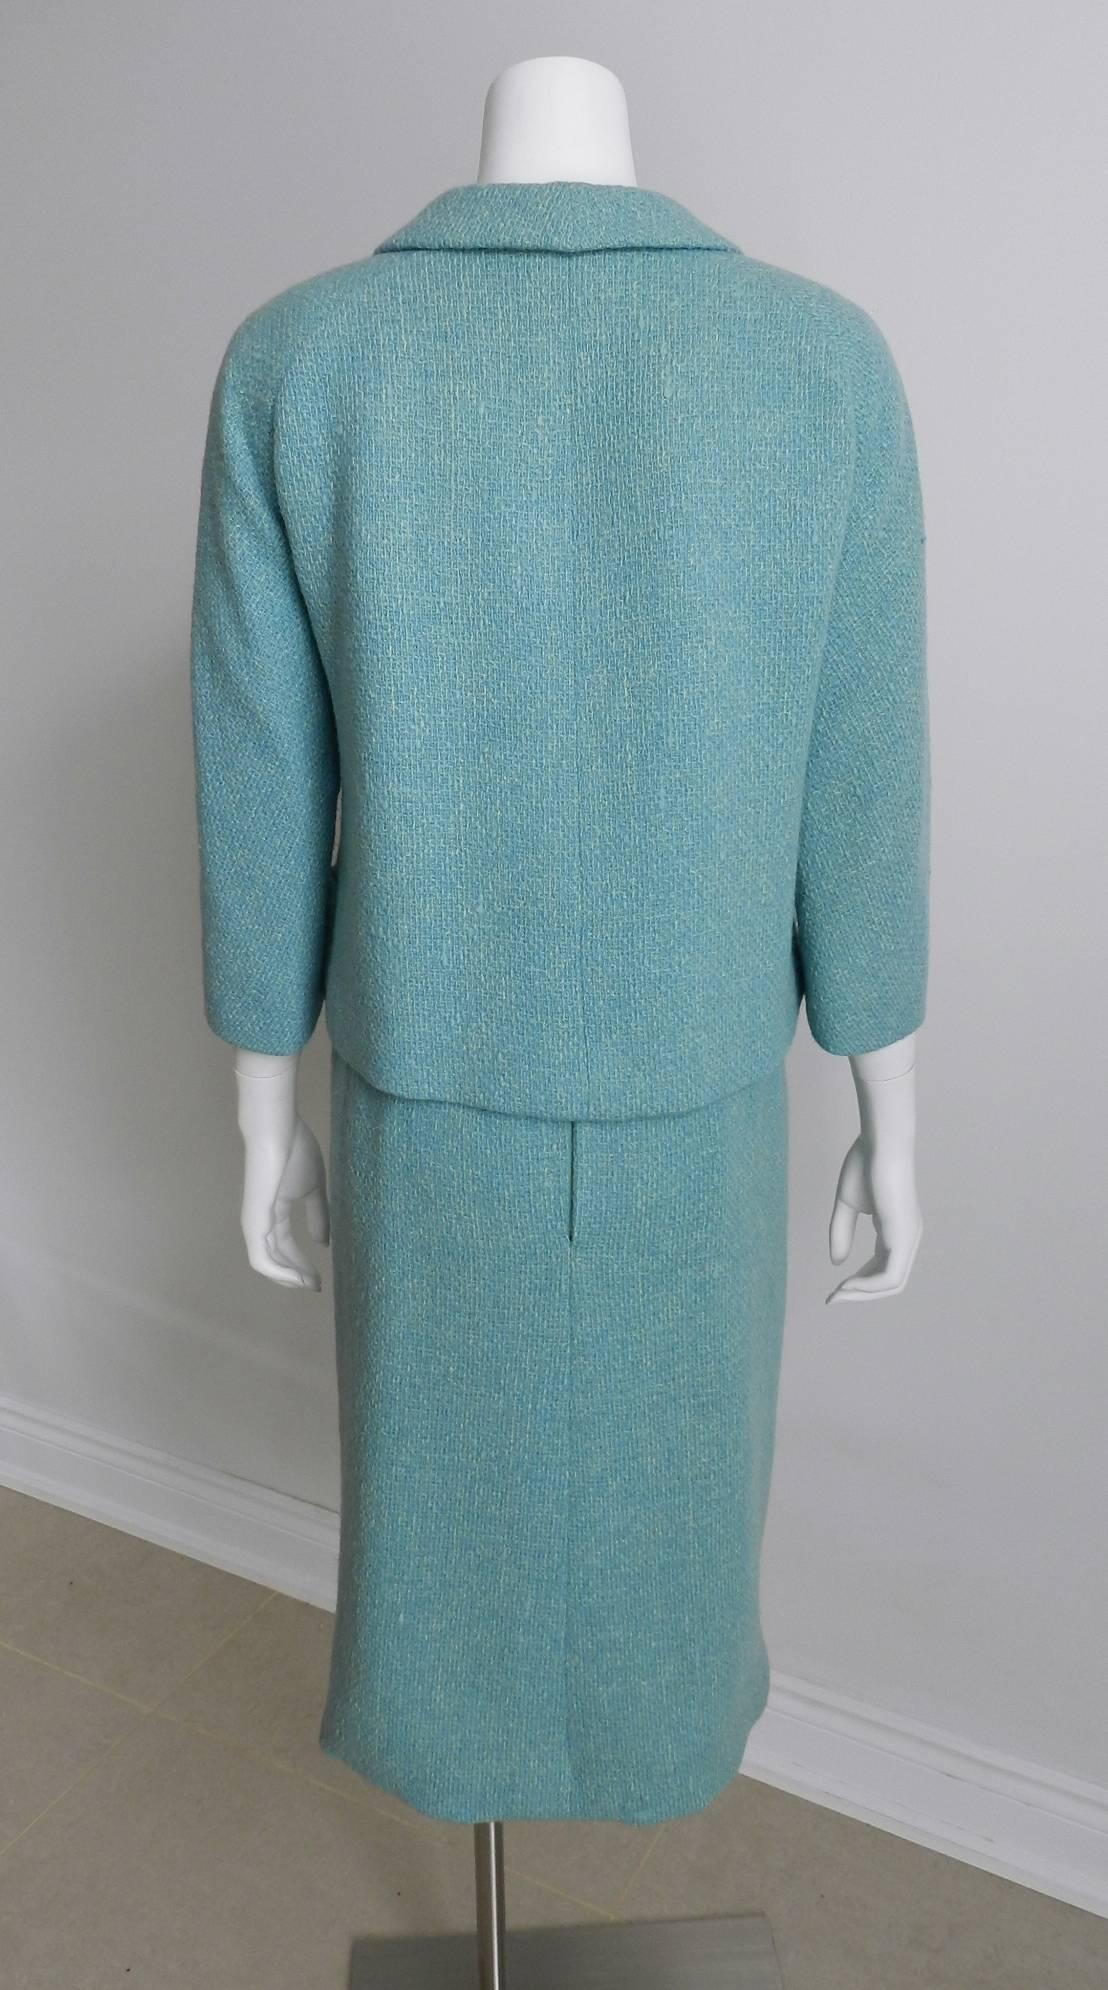 Christian Dior by Yves Saint Laurent 1960 Blue Dress and Jacket Suit 1